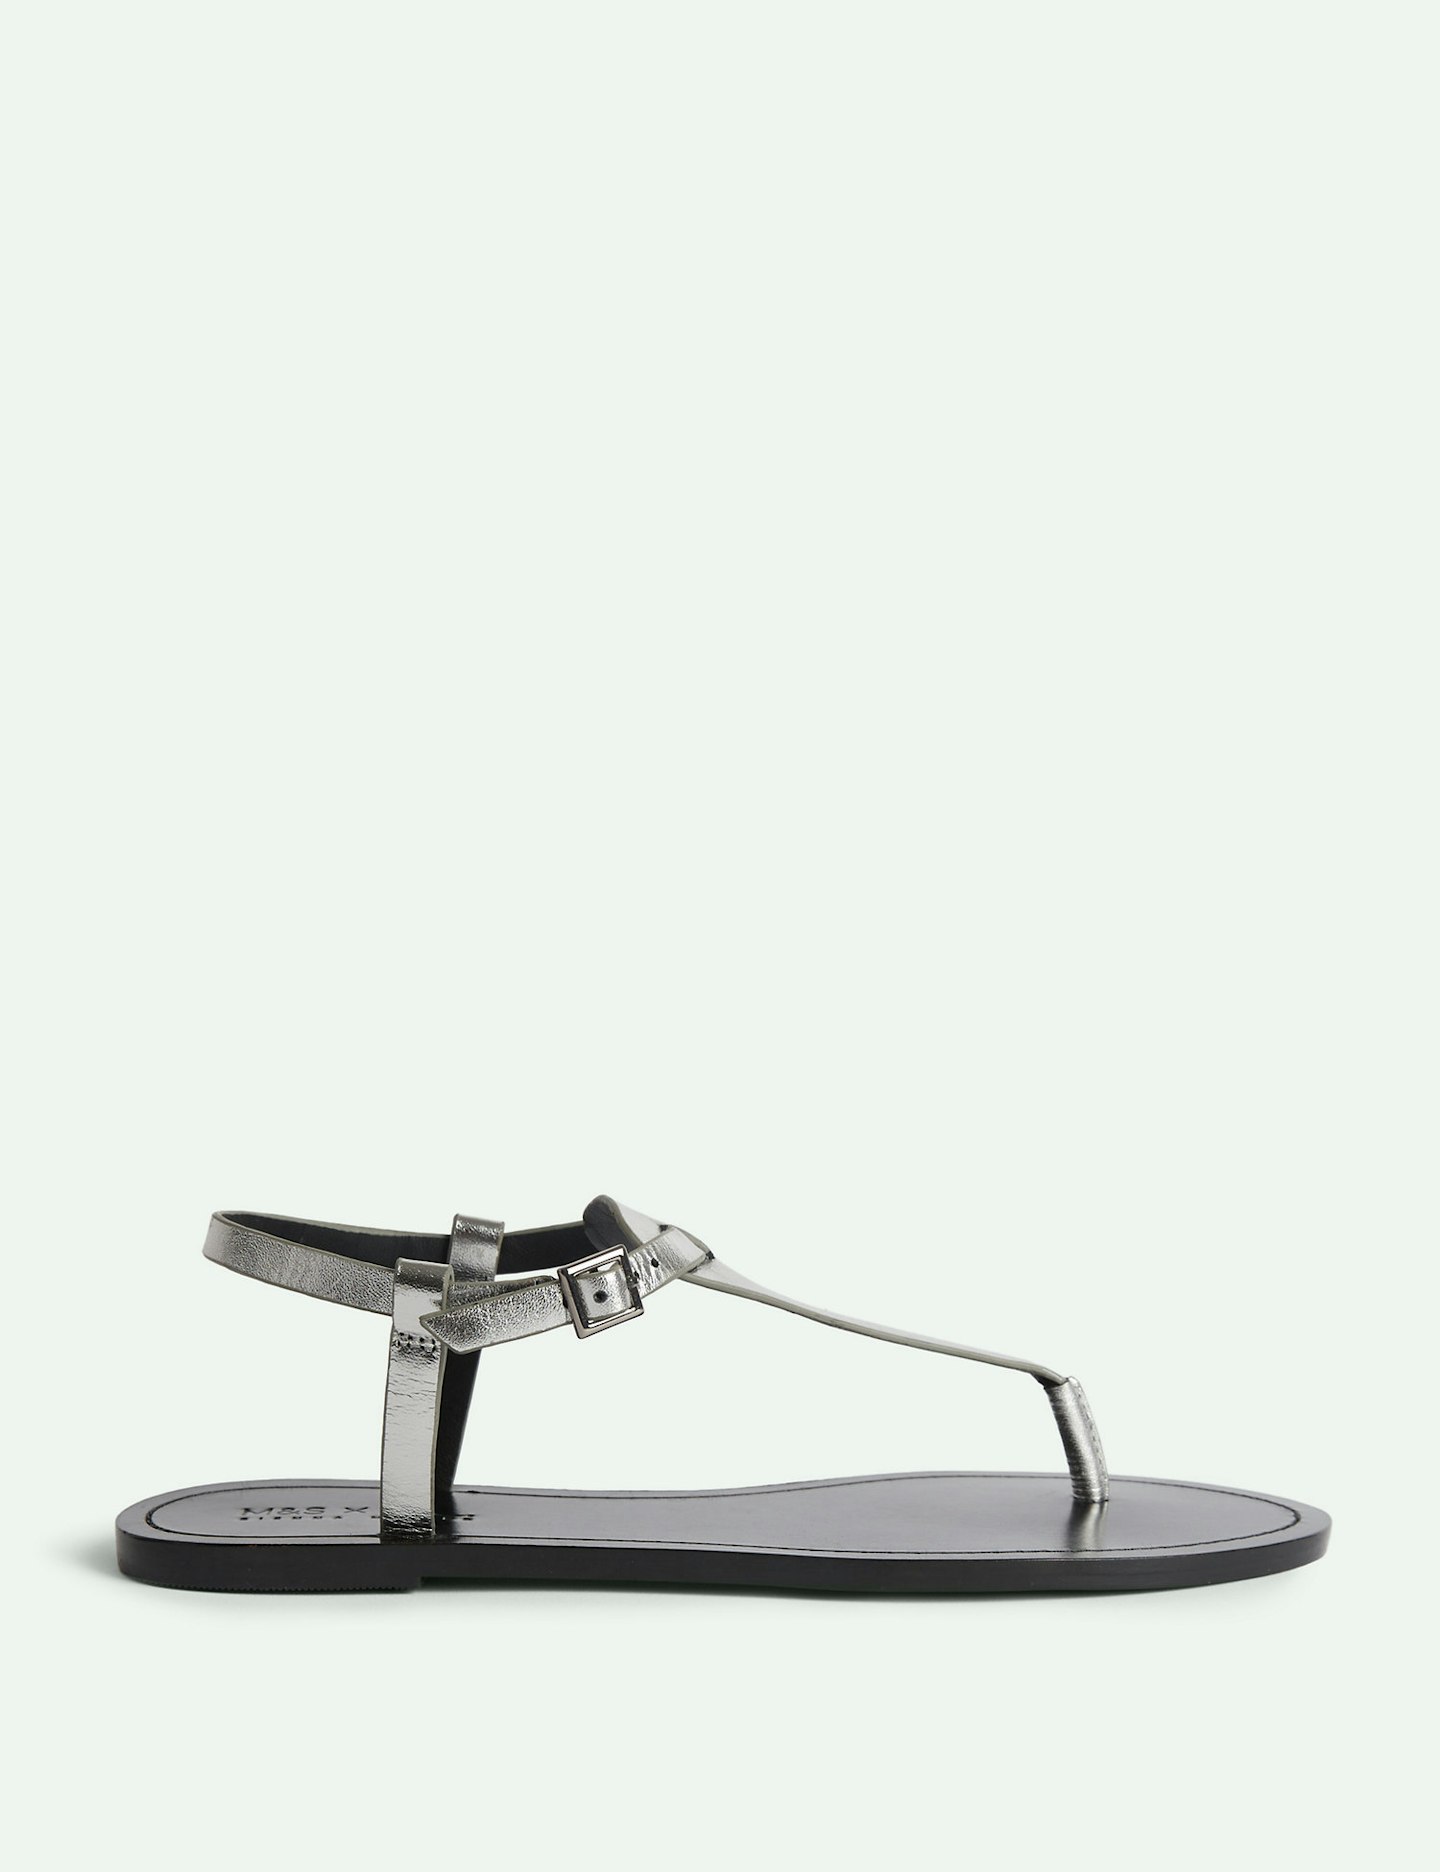 M&S x Sienna Miller Leather Thong Flat Sandals